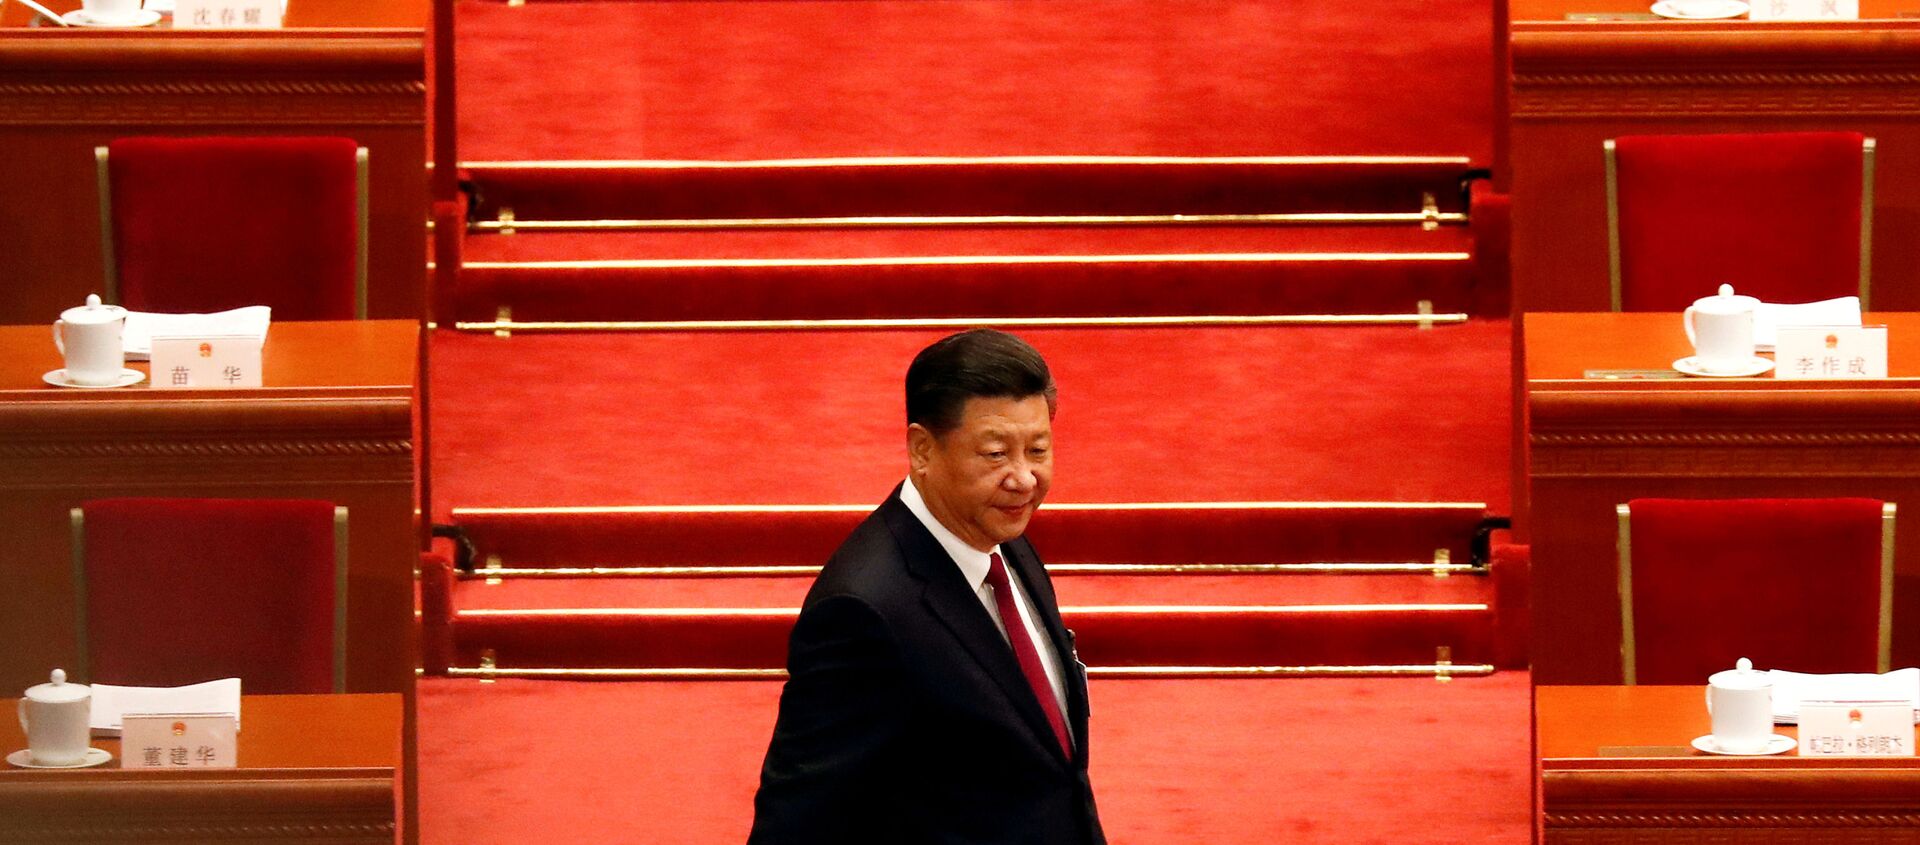 Chinese President Xi Jinping arrives for the opening session of the National People's Congress (NPC) at the Great Hall of the People in Beijing, China March 5, 2018. - Sputnik International, 1920, 26.01.2021